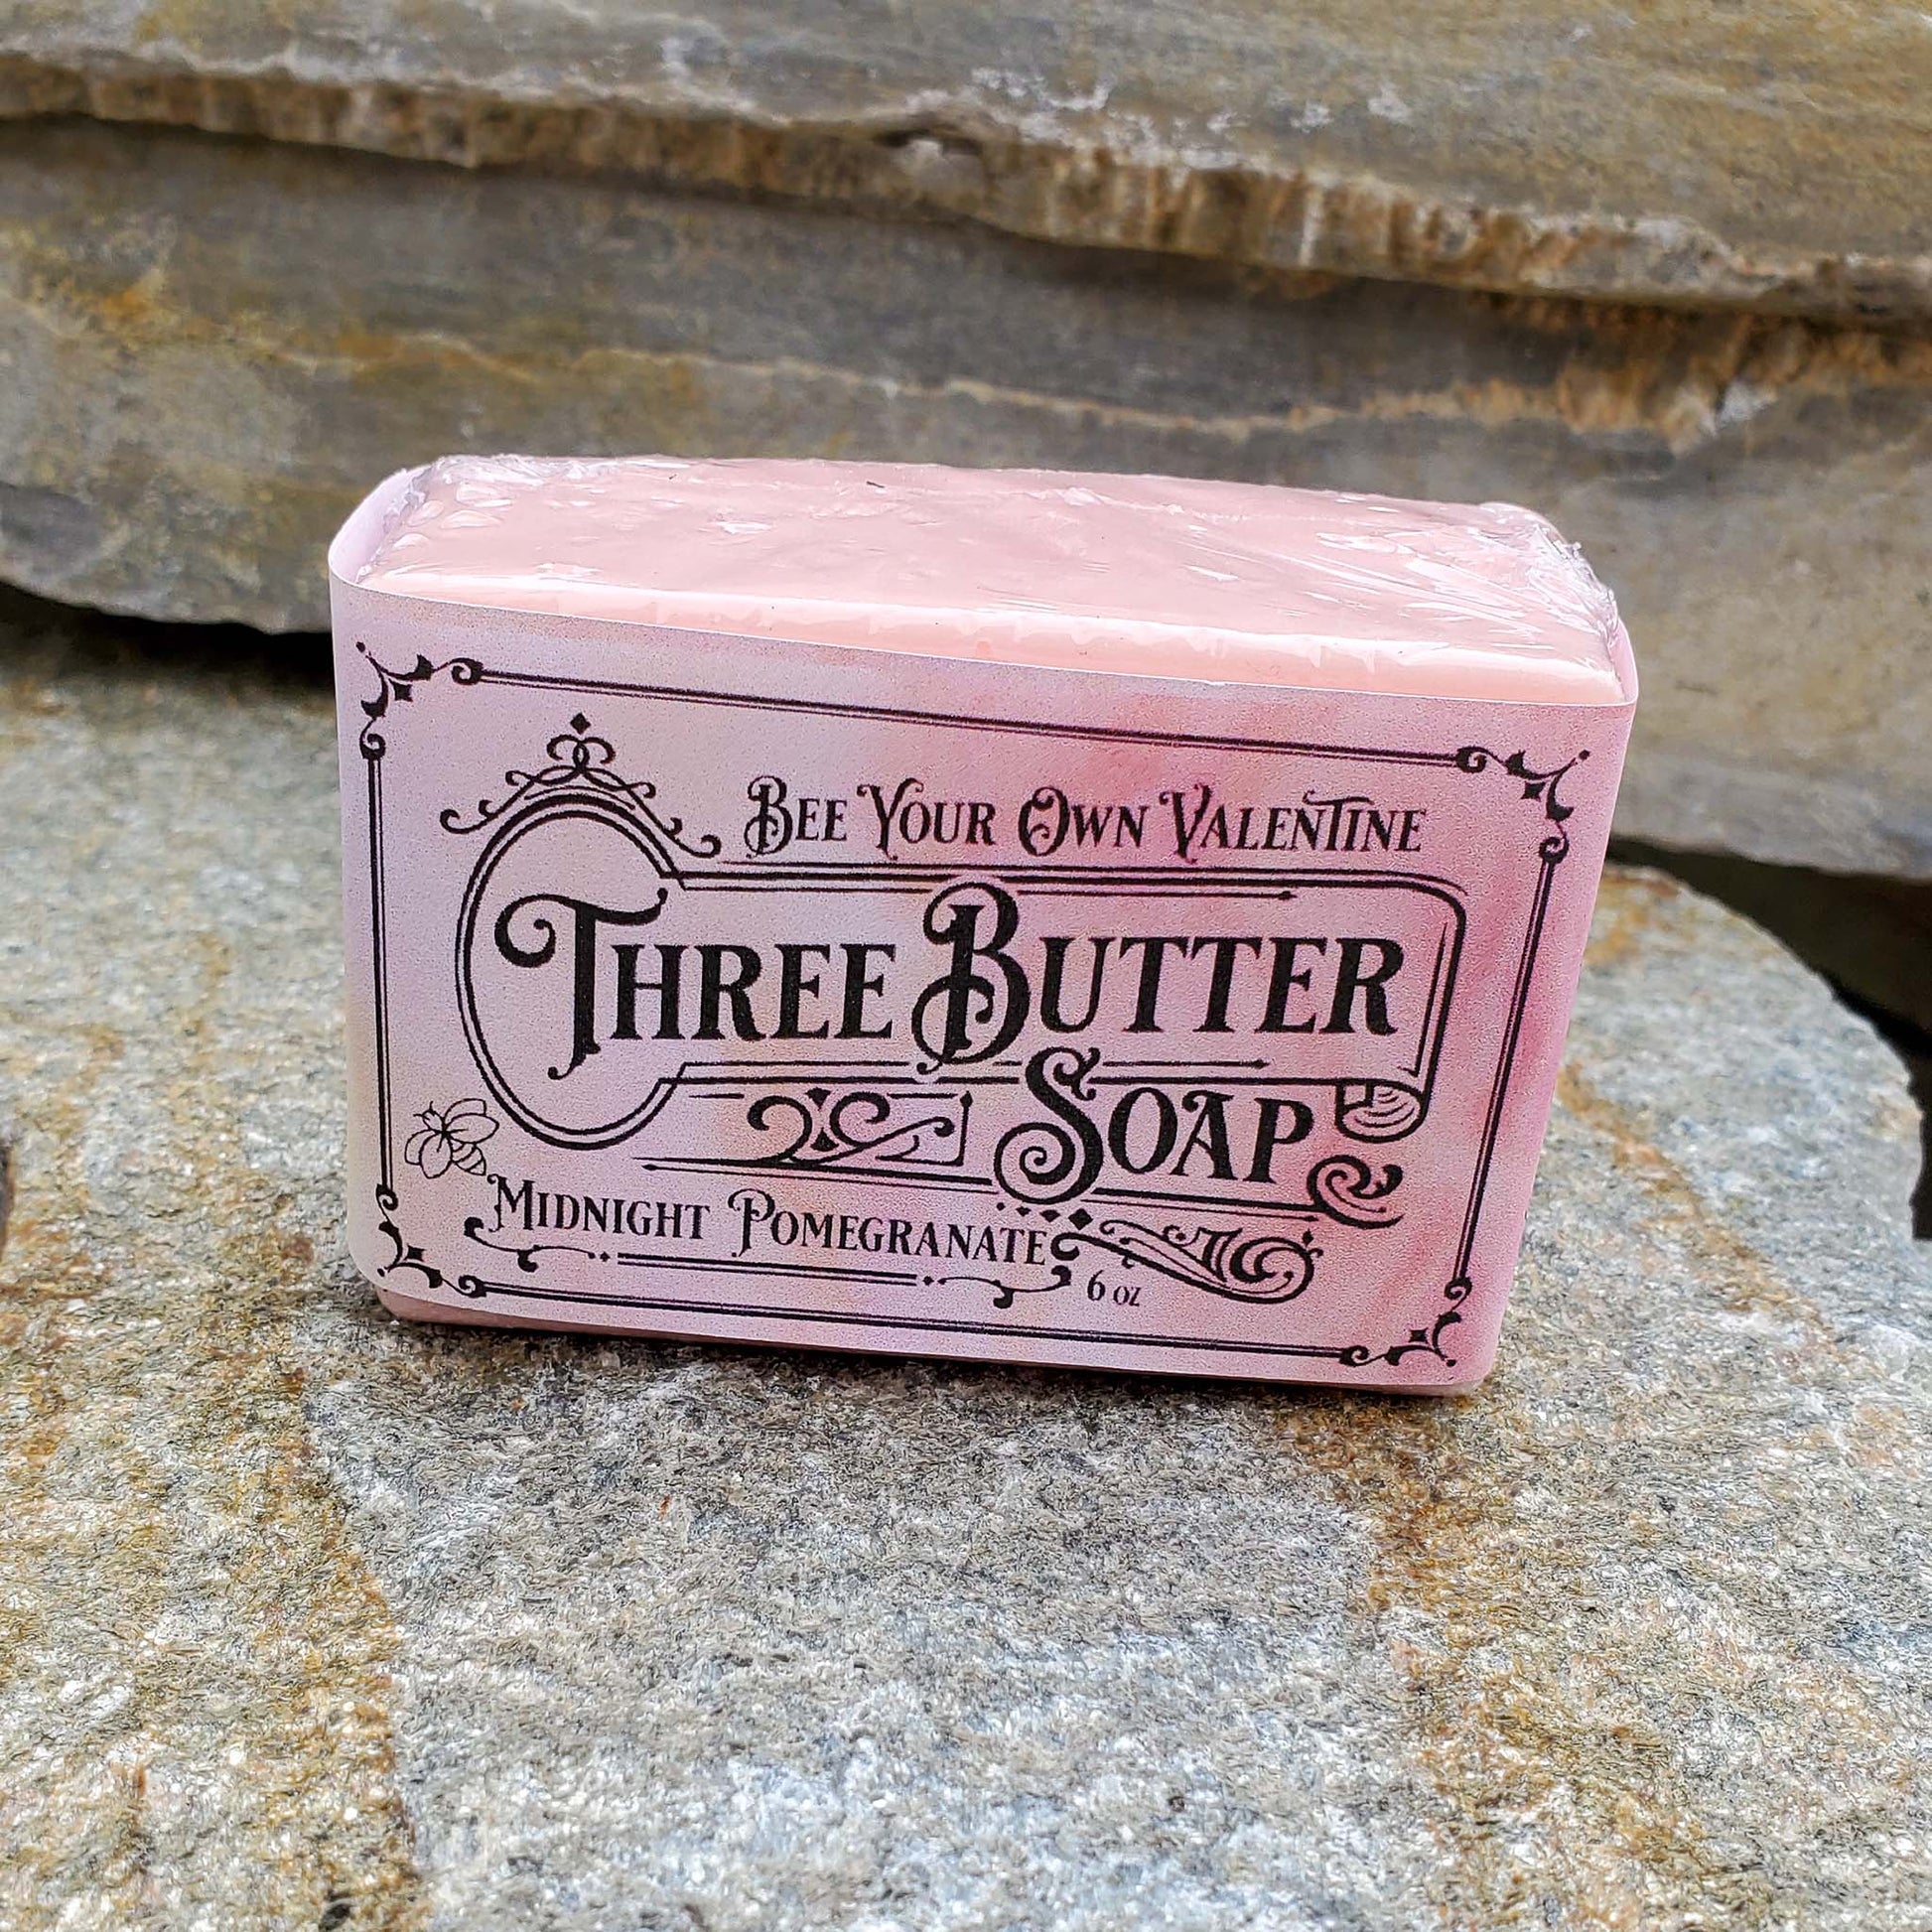 Bee Your Own Valentine Three Butter Soap Midnight Pomegranate